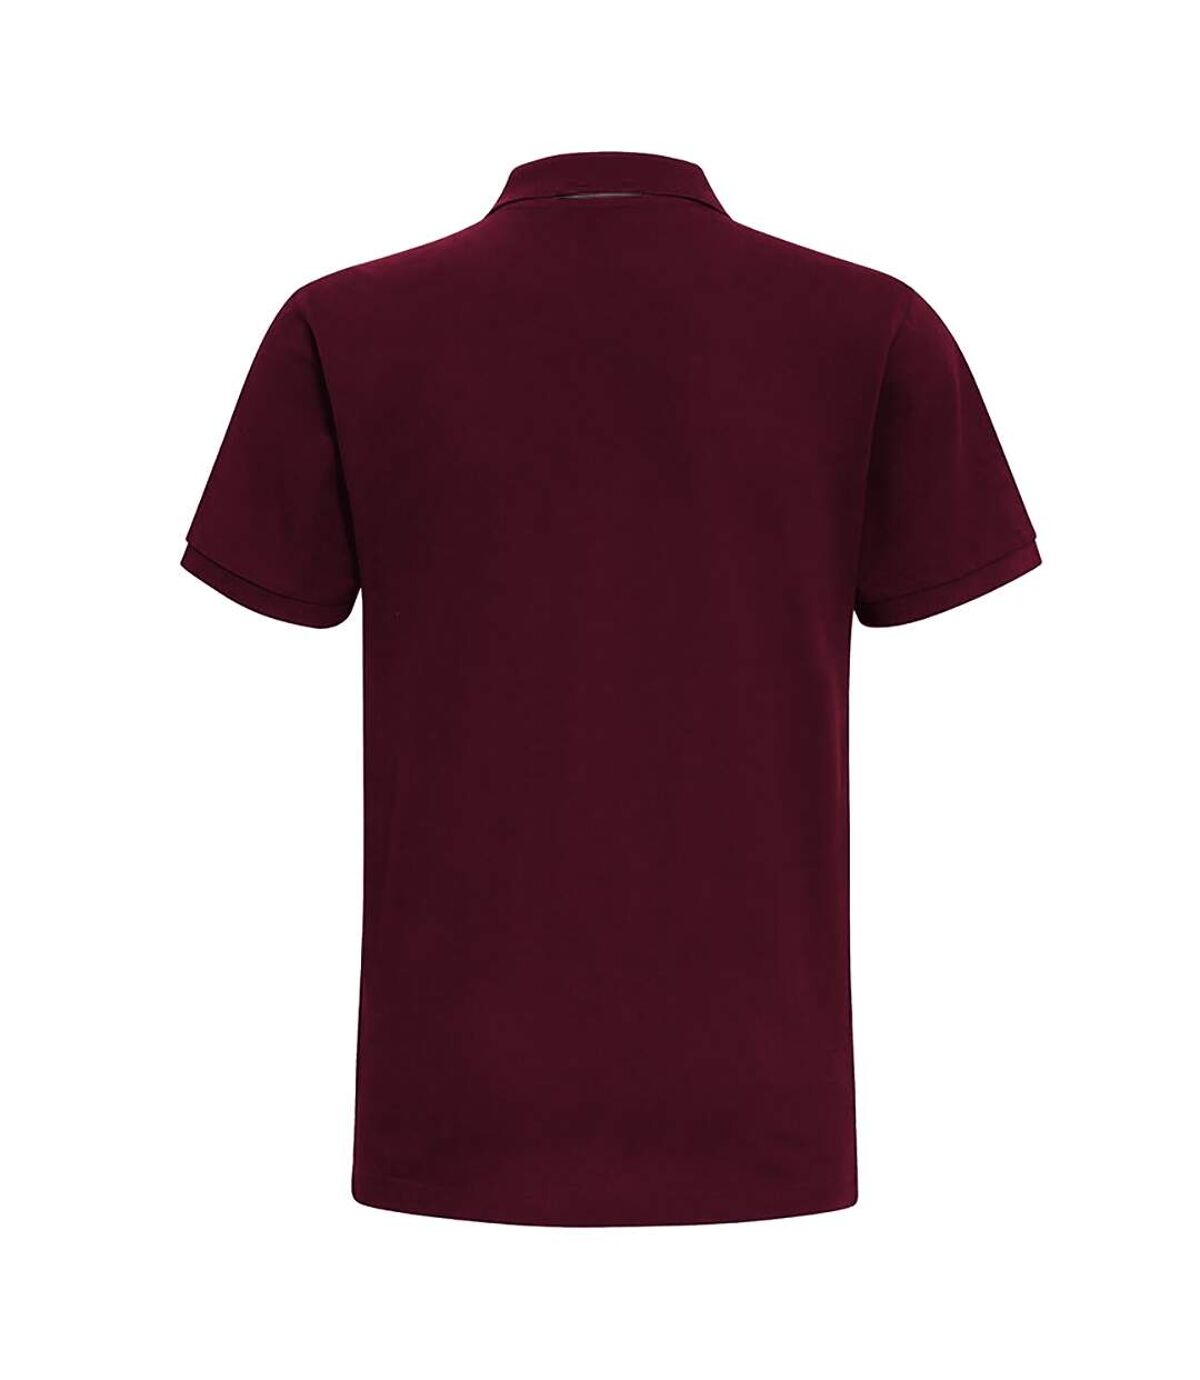 Asquith & Fox Mens Classic Fit Contrast Polo Shirt (Burgundy/ Charcoal)